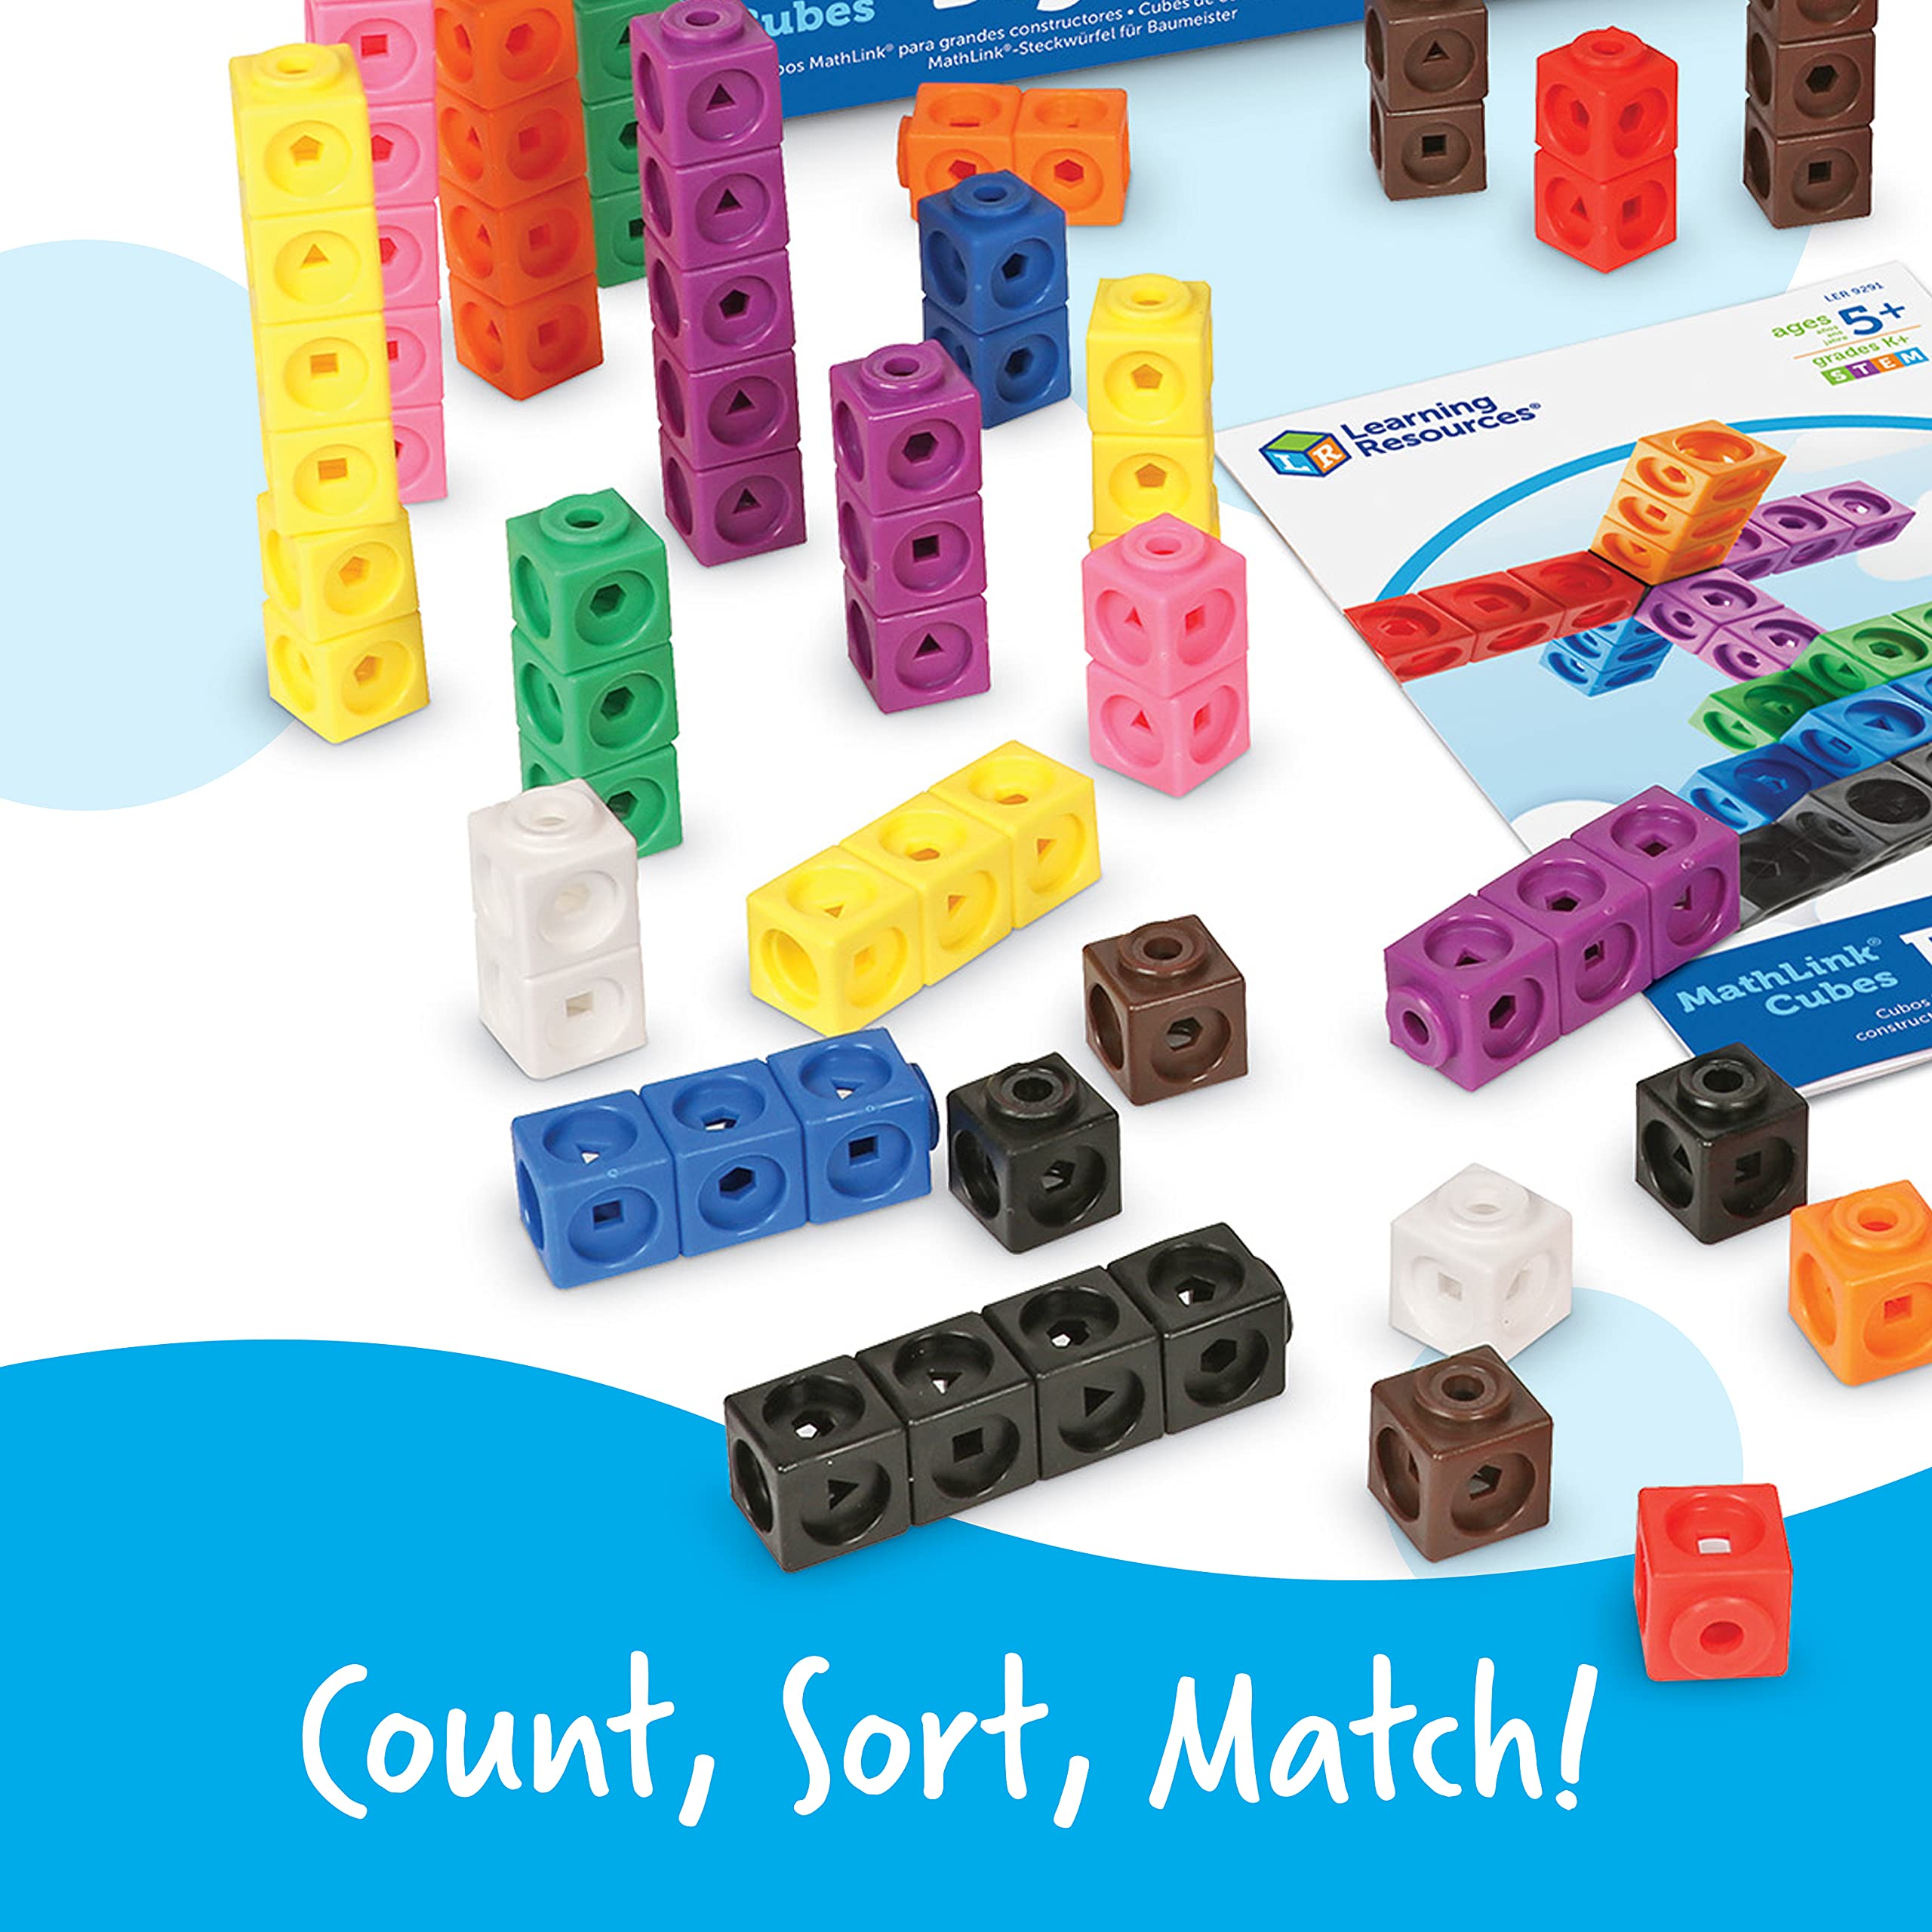 Learning Resources MathLink Cubes Big Builders - Set of 200 Cubes, Ages 5+, Develops Early Math Skills, STEM Toys, Math Games for Kids, Math Cubes for Kids,Back to School Gifts